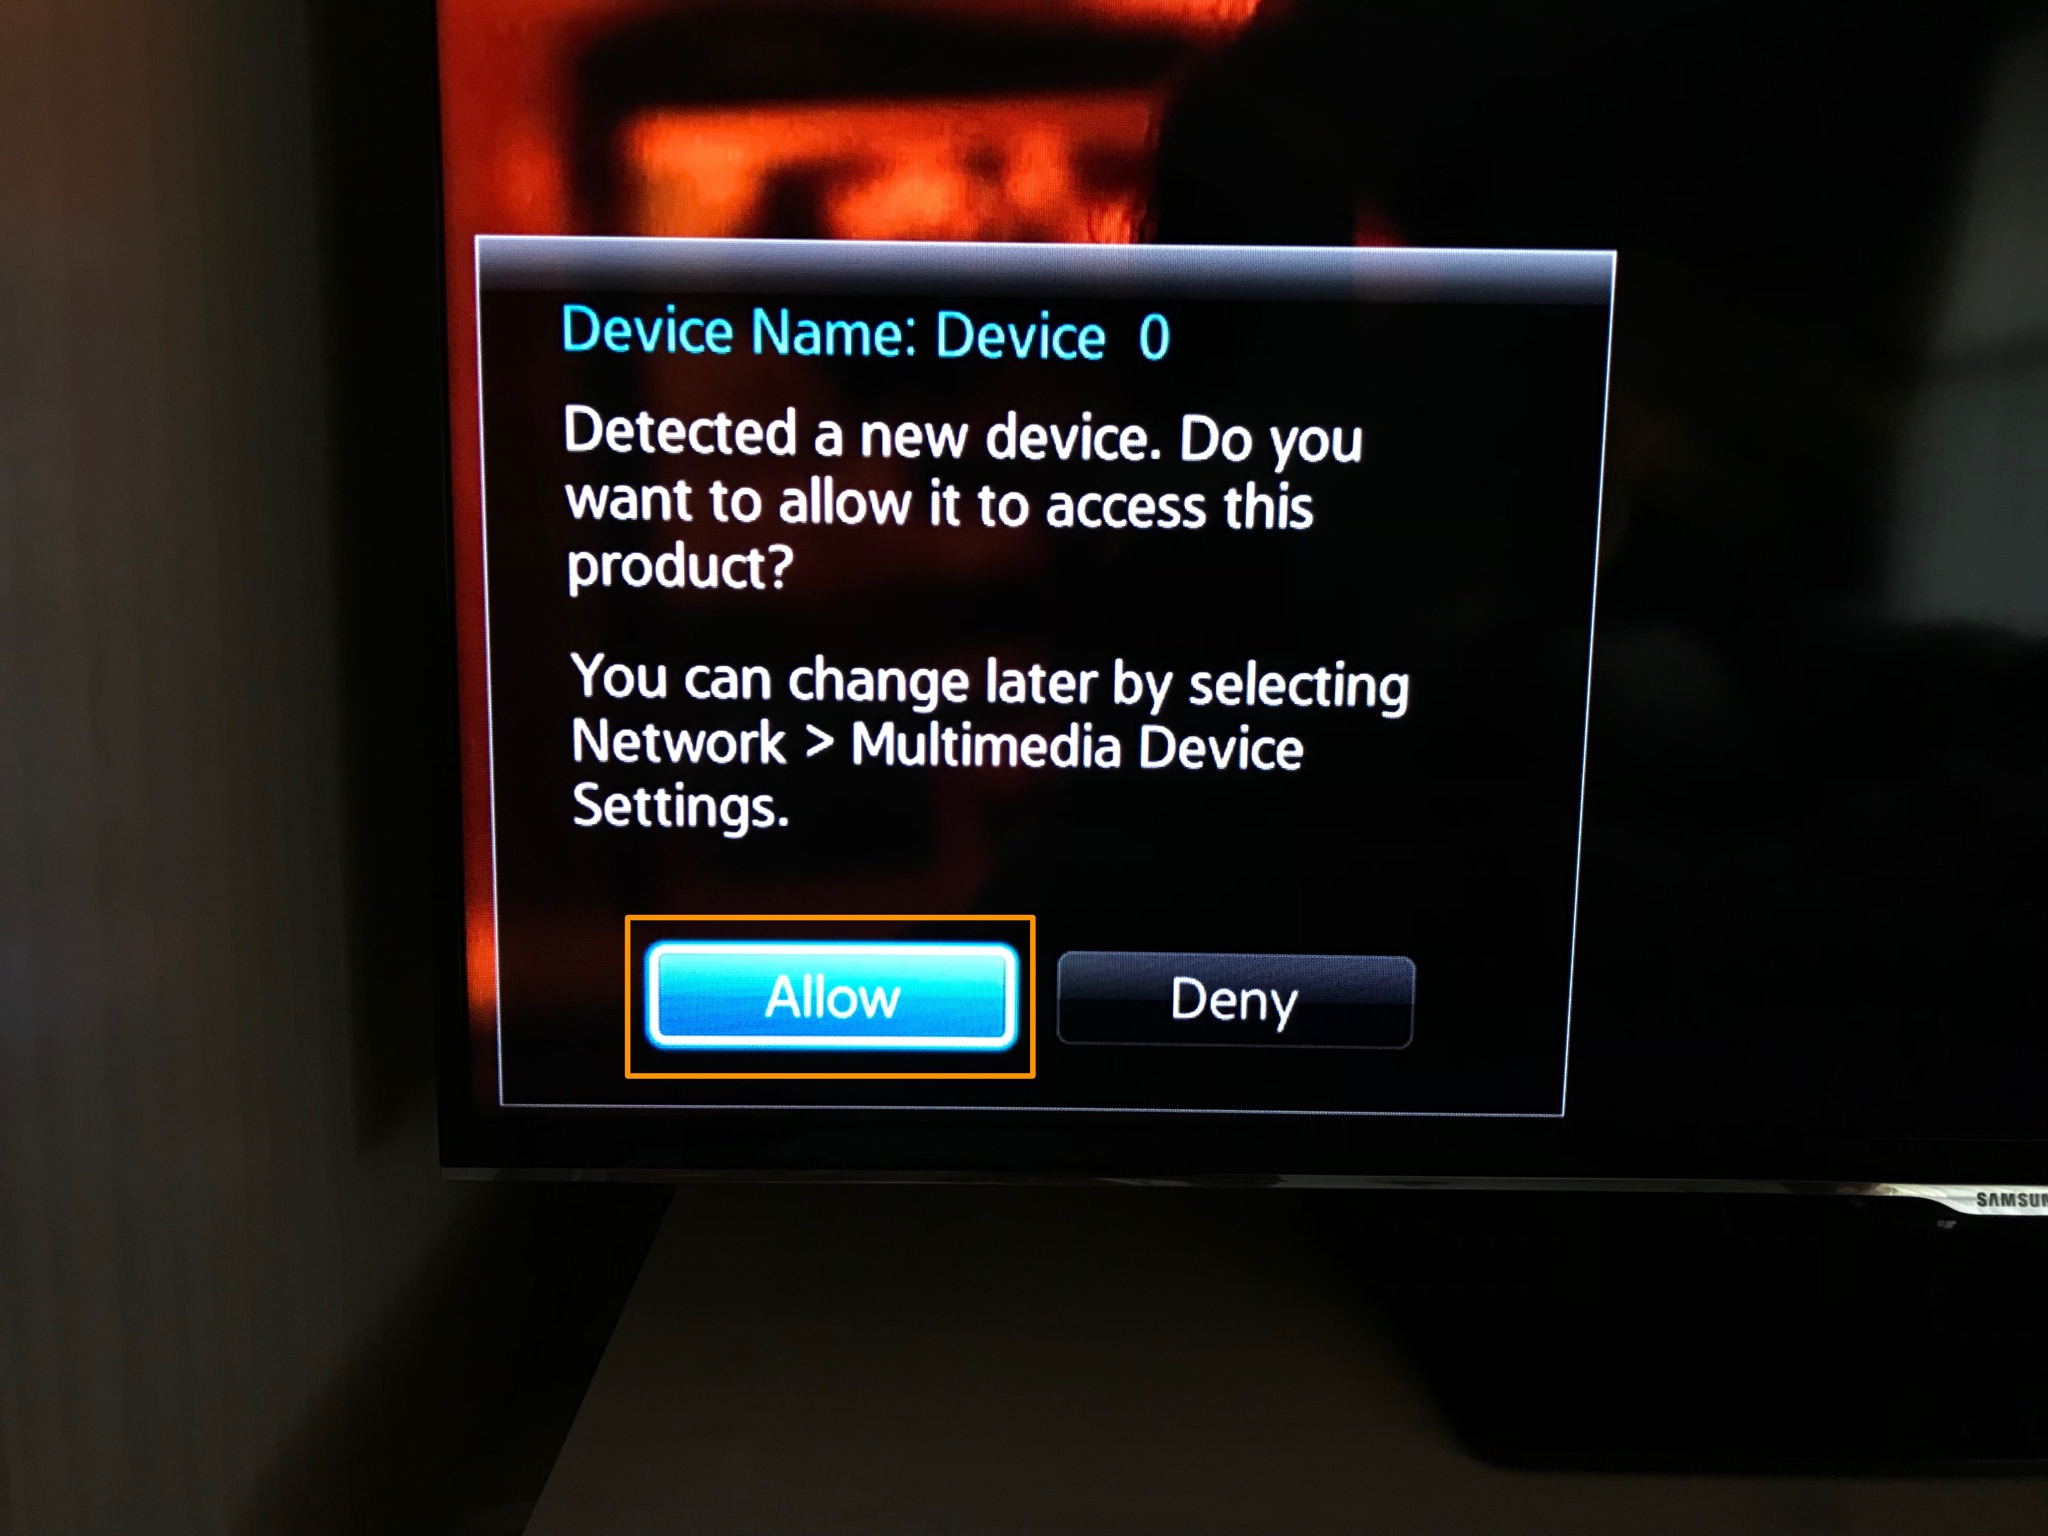 Mirror Your Iphone Or Ipad On A Smart Tv, How Do I Mirror My Ipad To Samsung Tv For Free